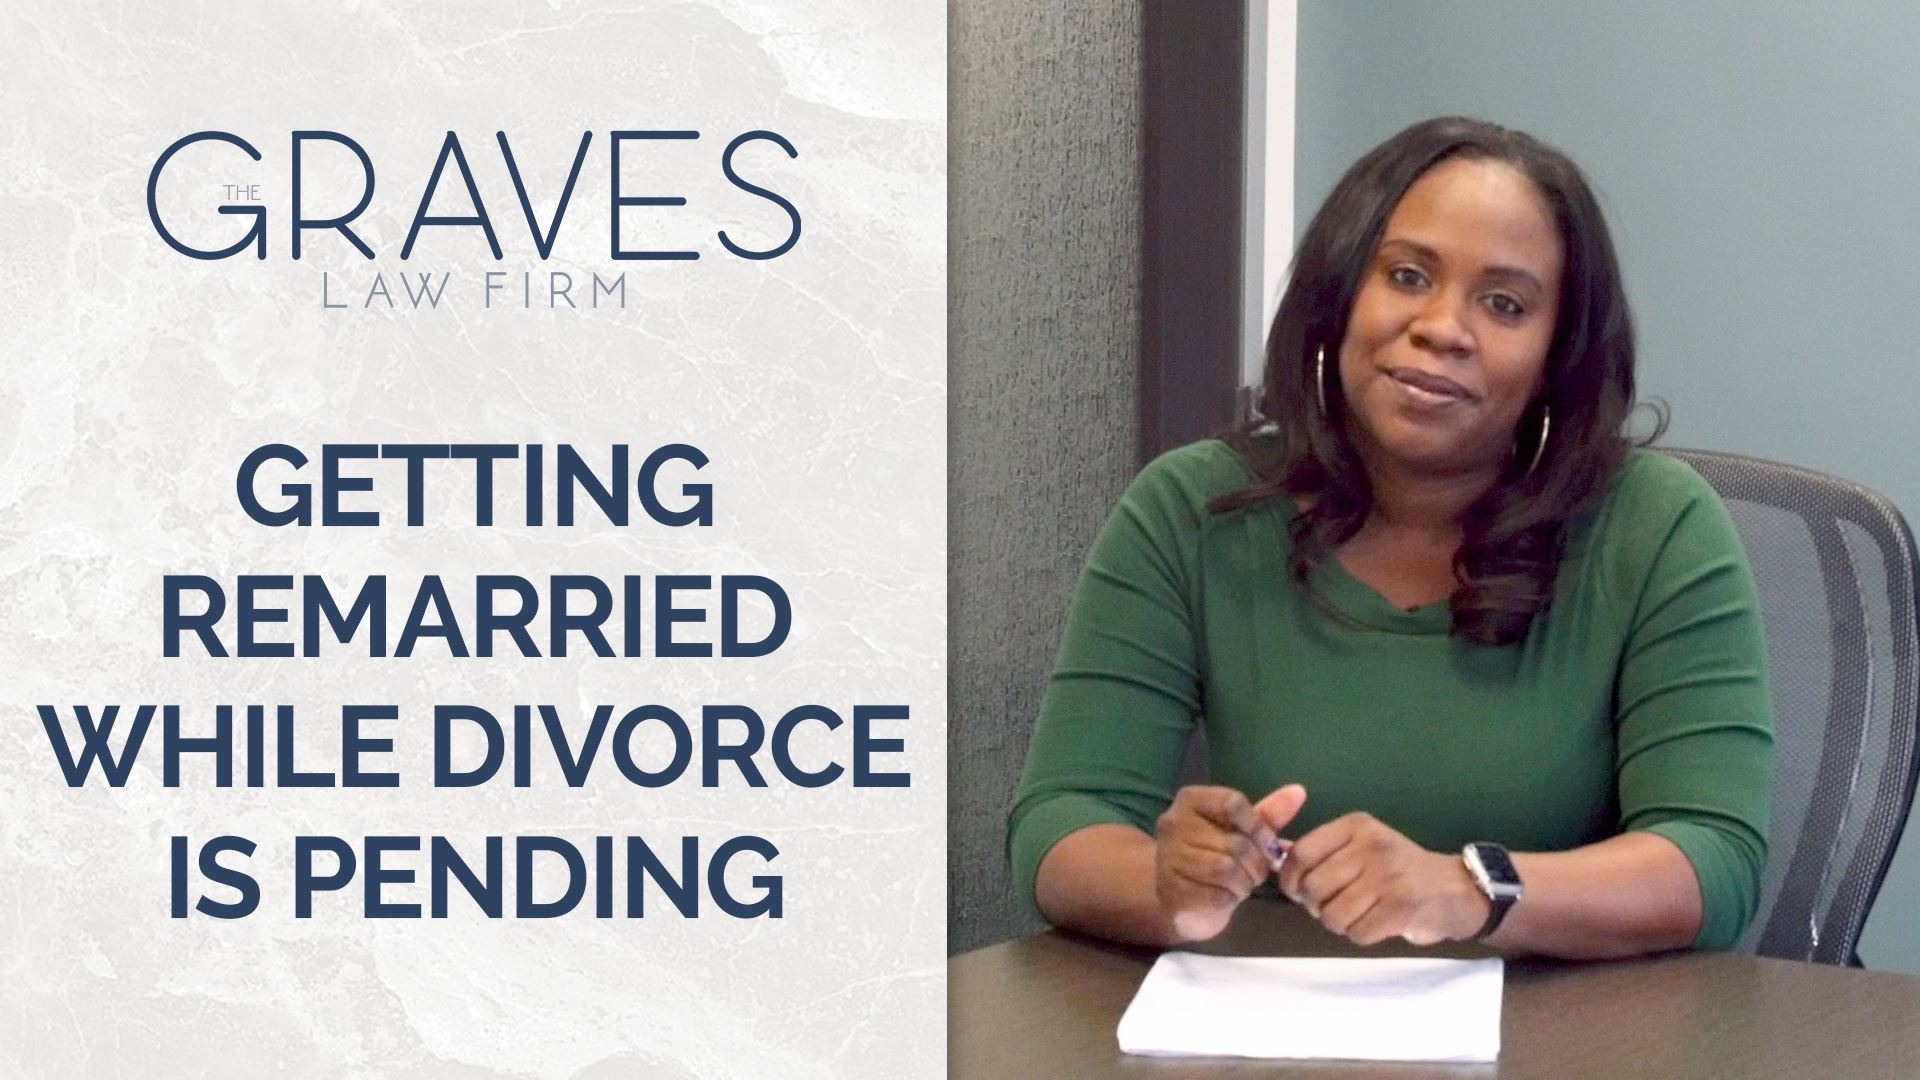 can you date while divorce is pending